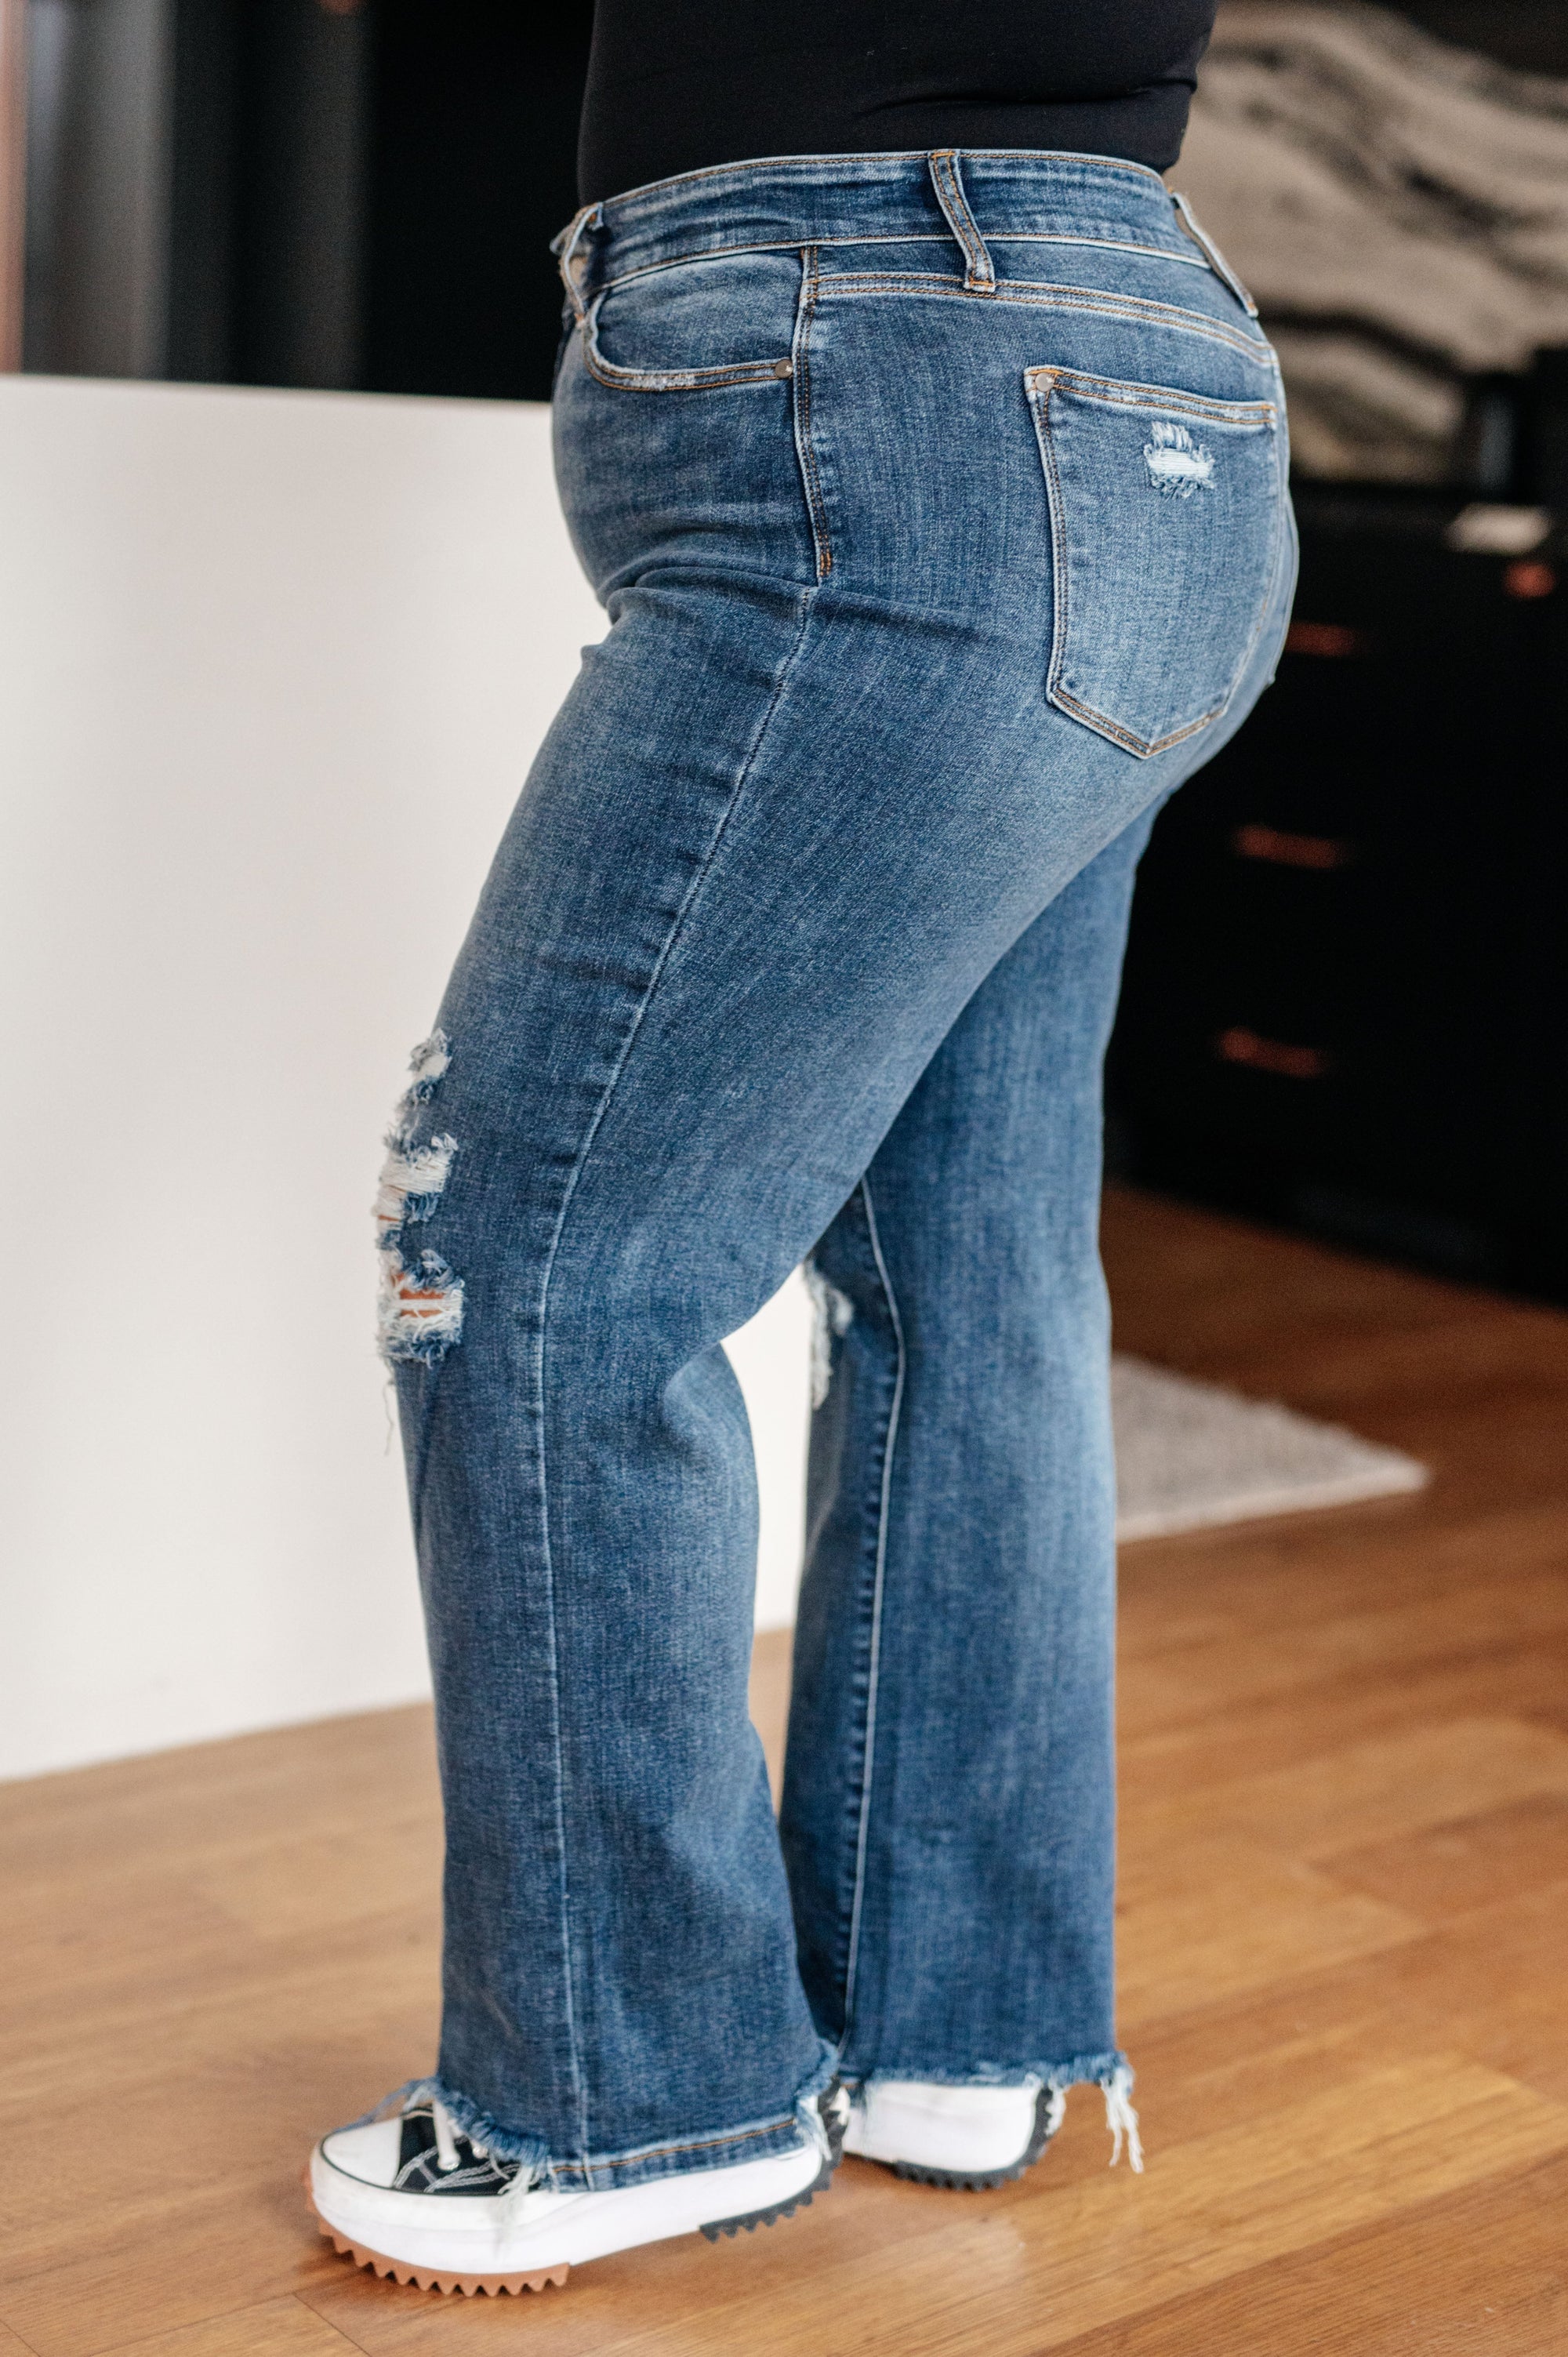 Judy Blue Rose High Waist 90s Straight Jeans in Dark Wash Jeans - Boujee Boutique 